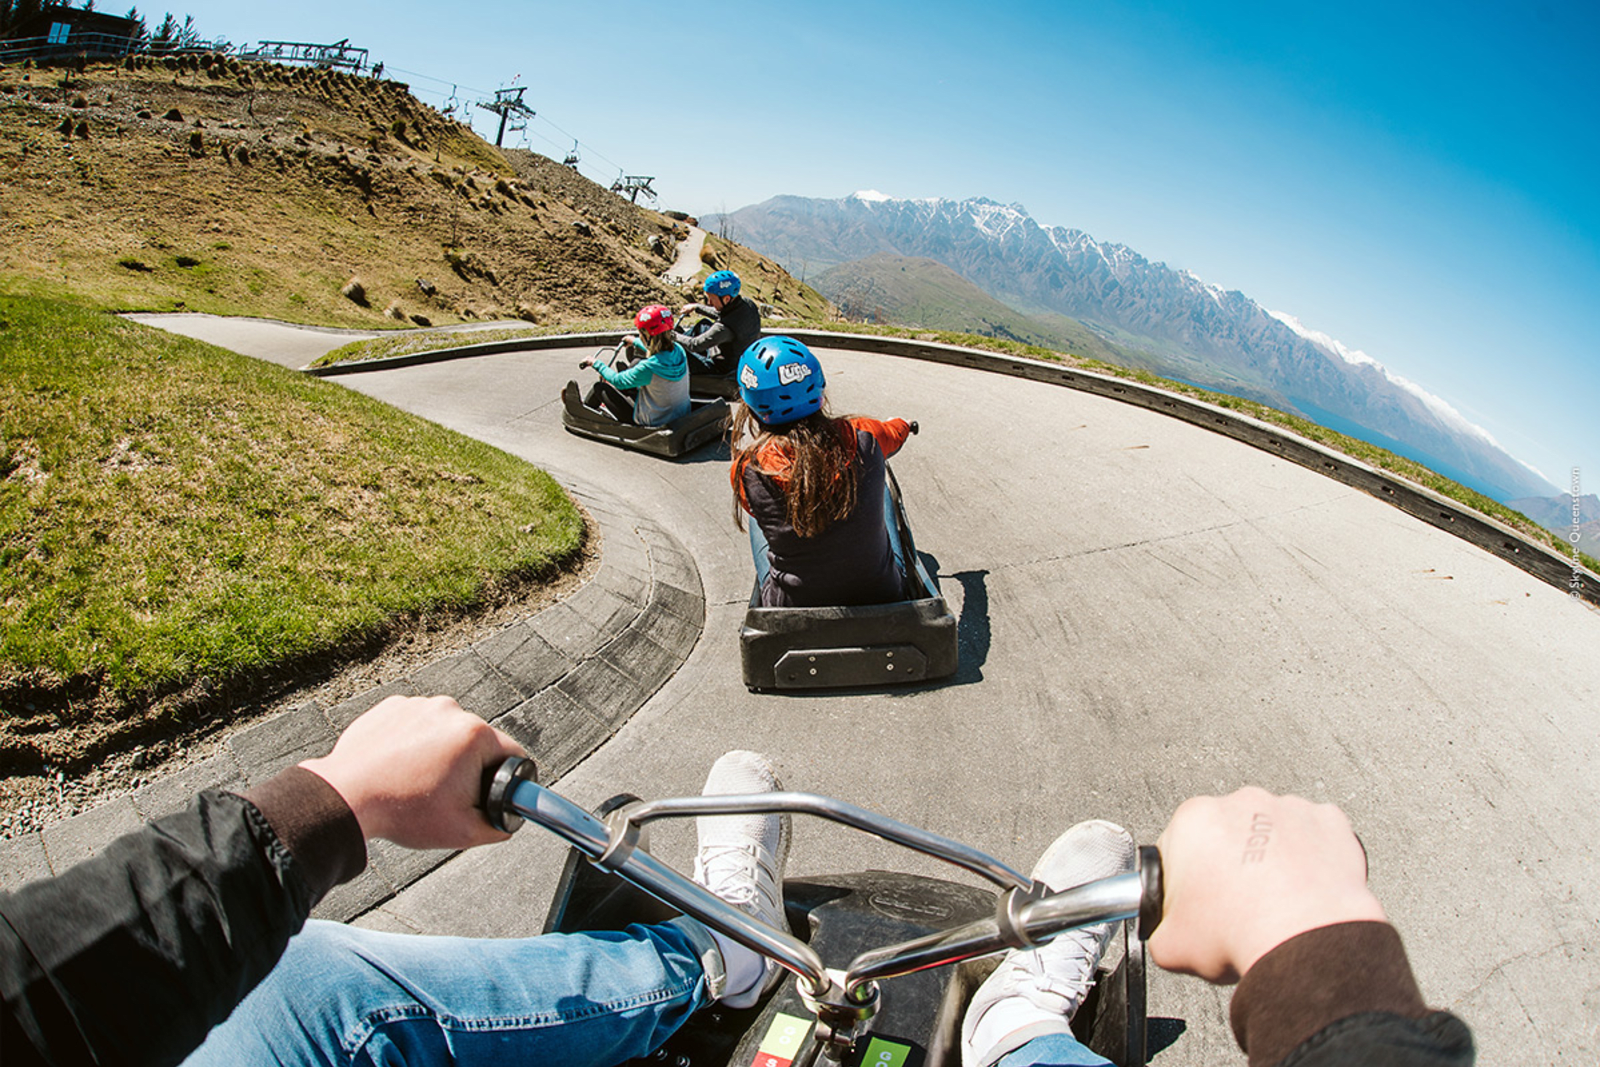 A family rides luges down a steep course with The Remarkables mountain range in the background, Queenstown NZ.